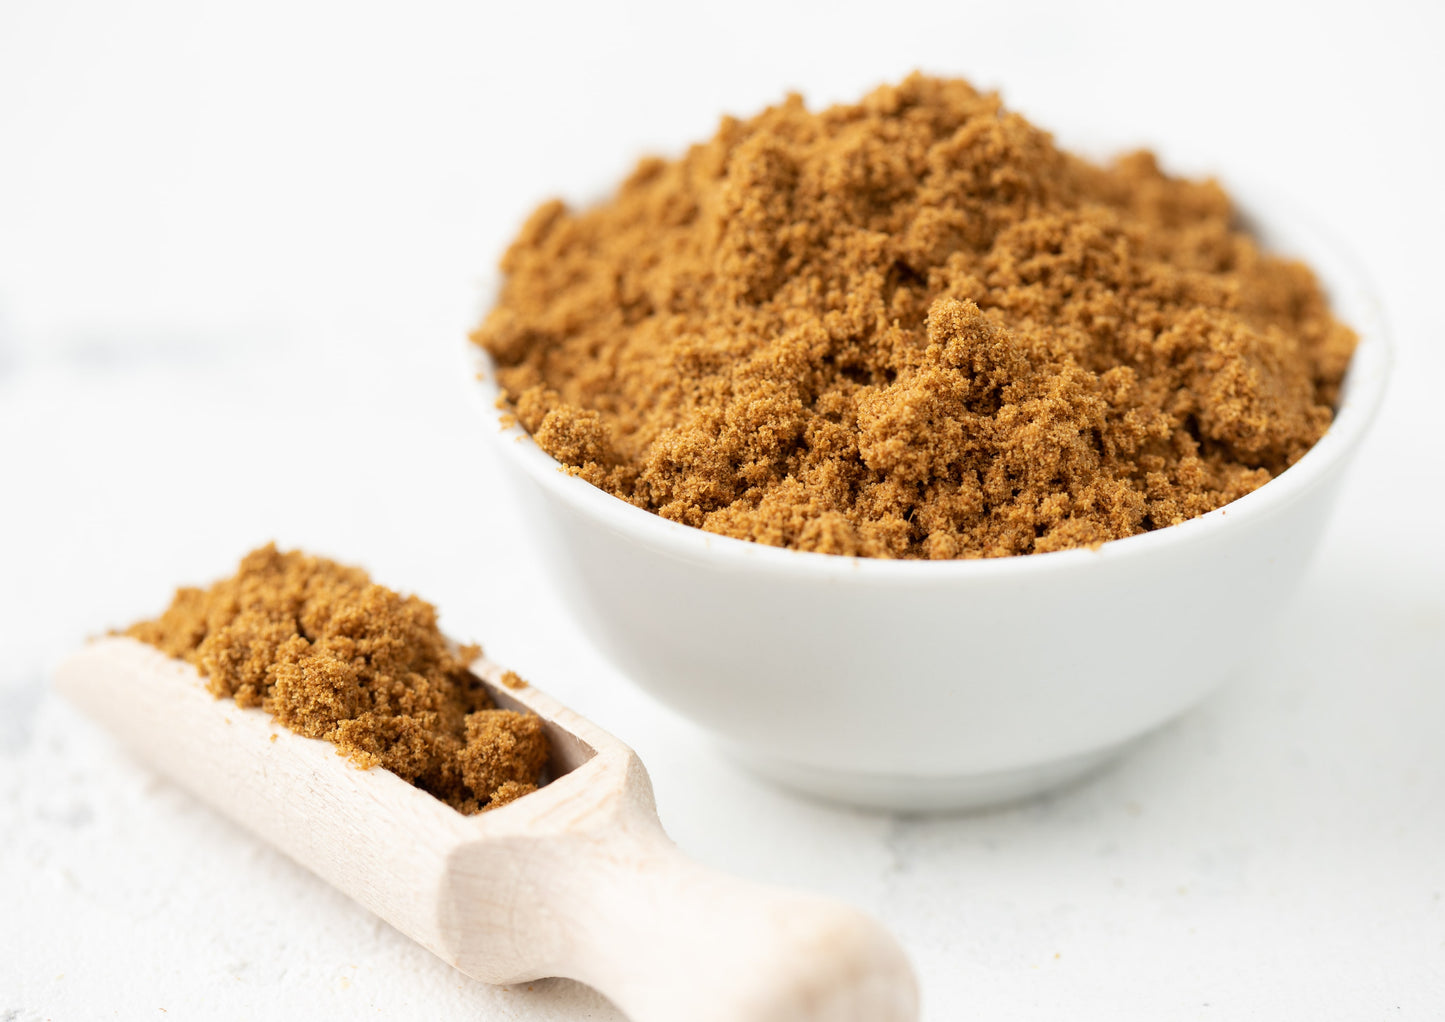 Cumin Powder — Non-GMO Verified, Finely Ground Dried Cumin Seeds, Jeera, Bulk, Vegan, Kosher. High in Iron, Magnesium, and Calcium. Great for Mexican, Middle Eastern, and Indian Cuisines